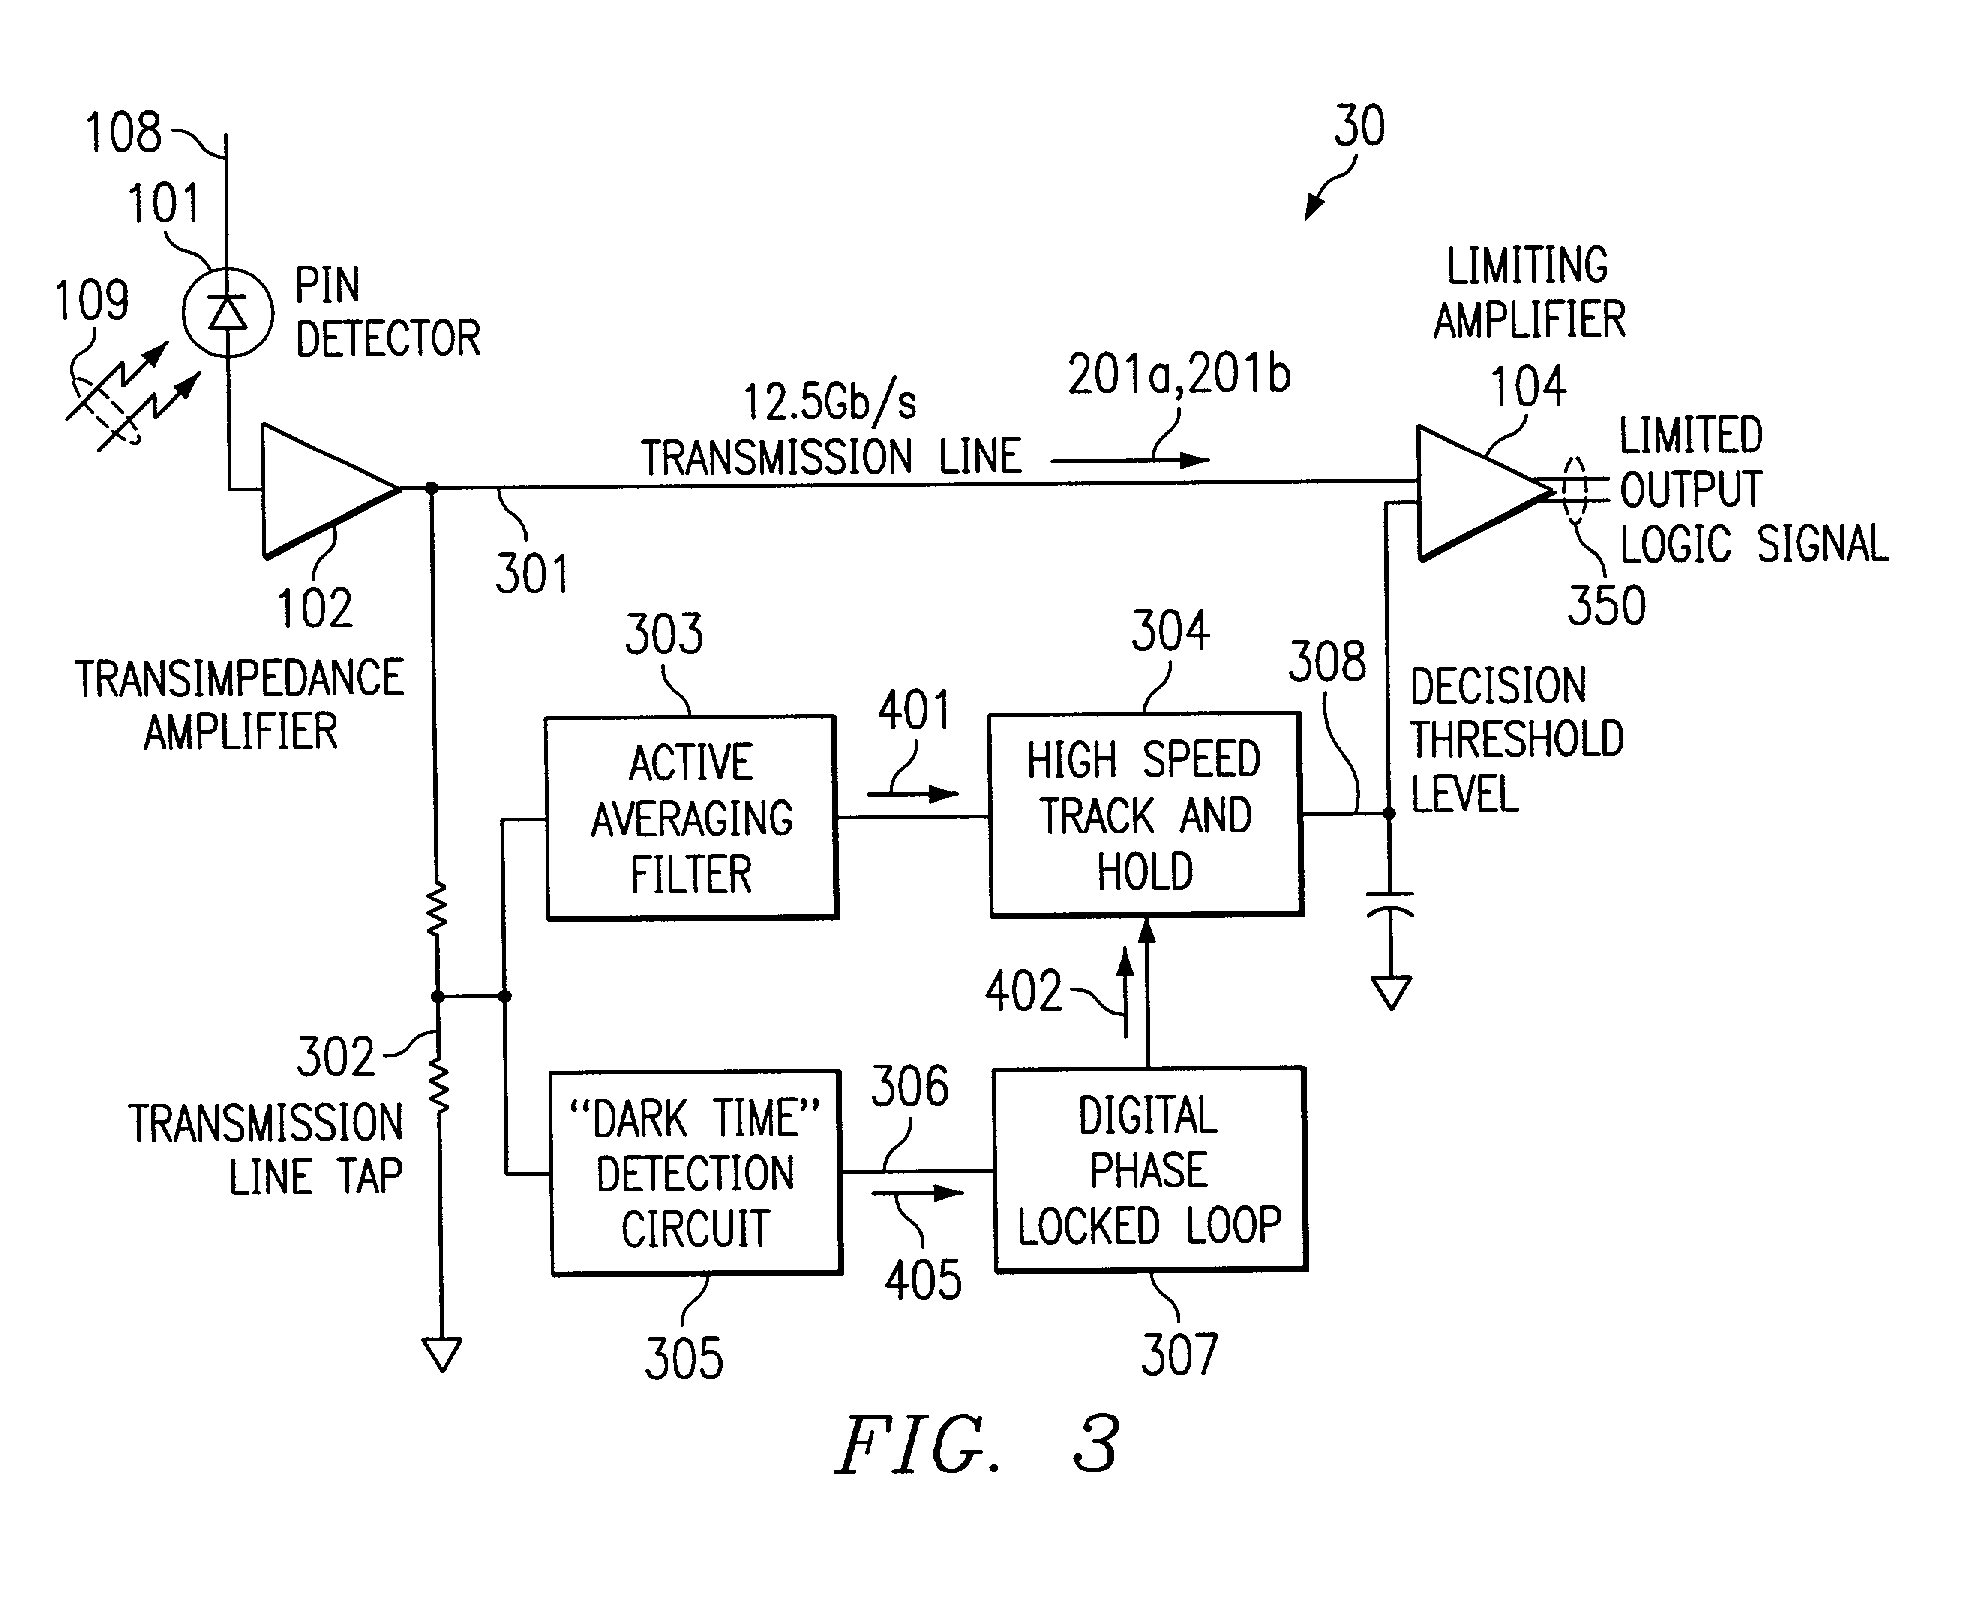 Fast decision threshold controller for burst-mode receiver